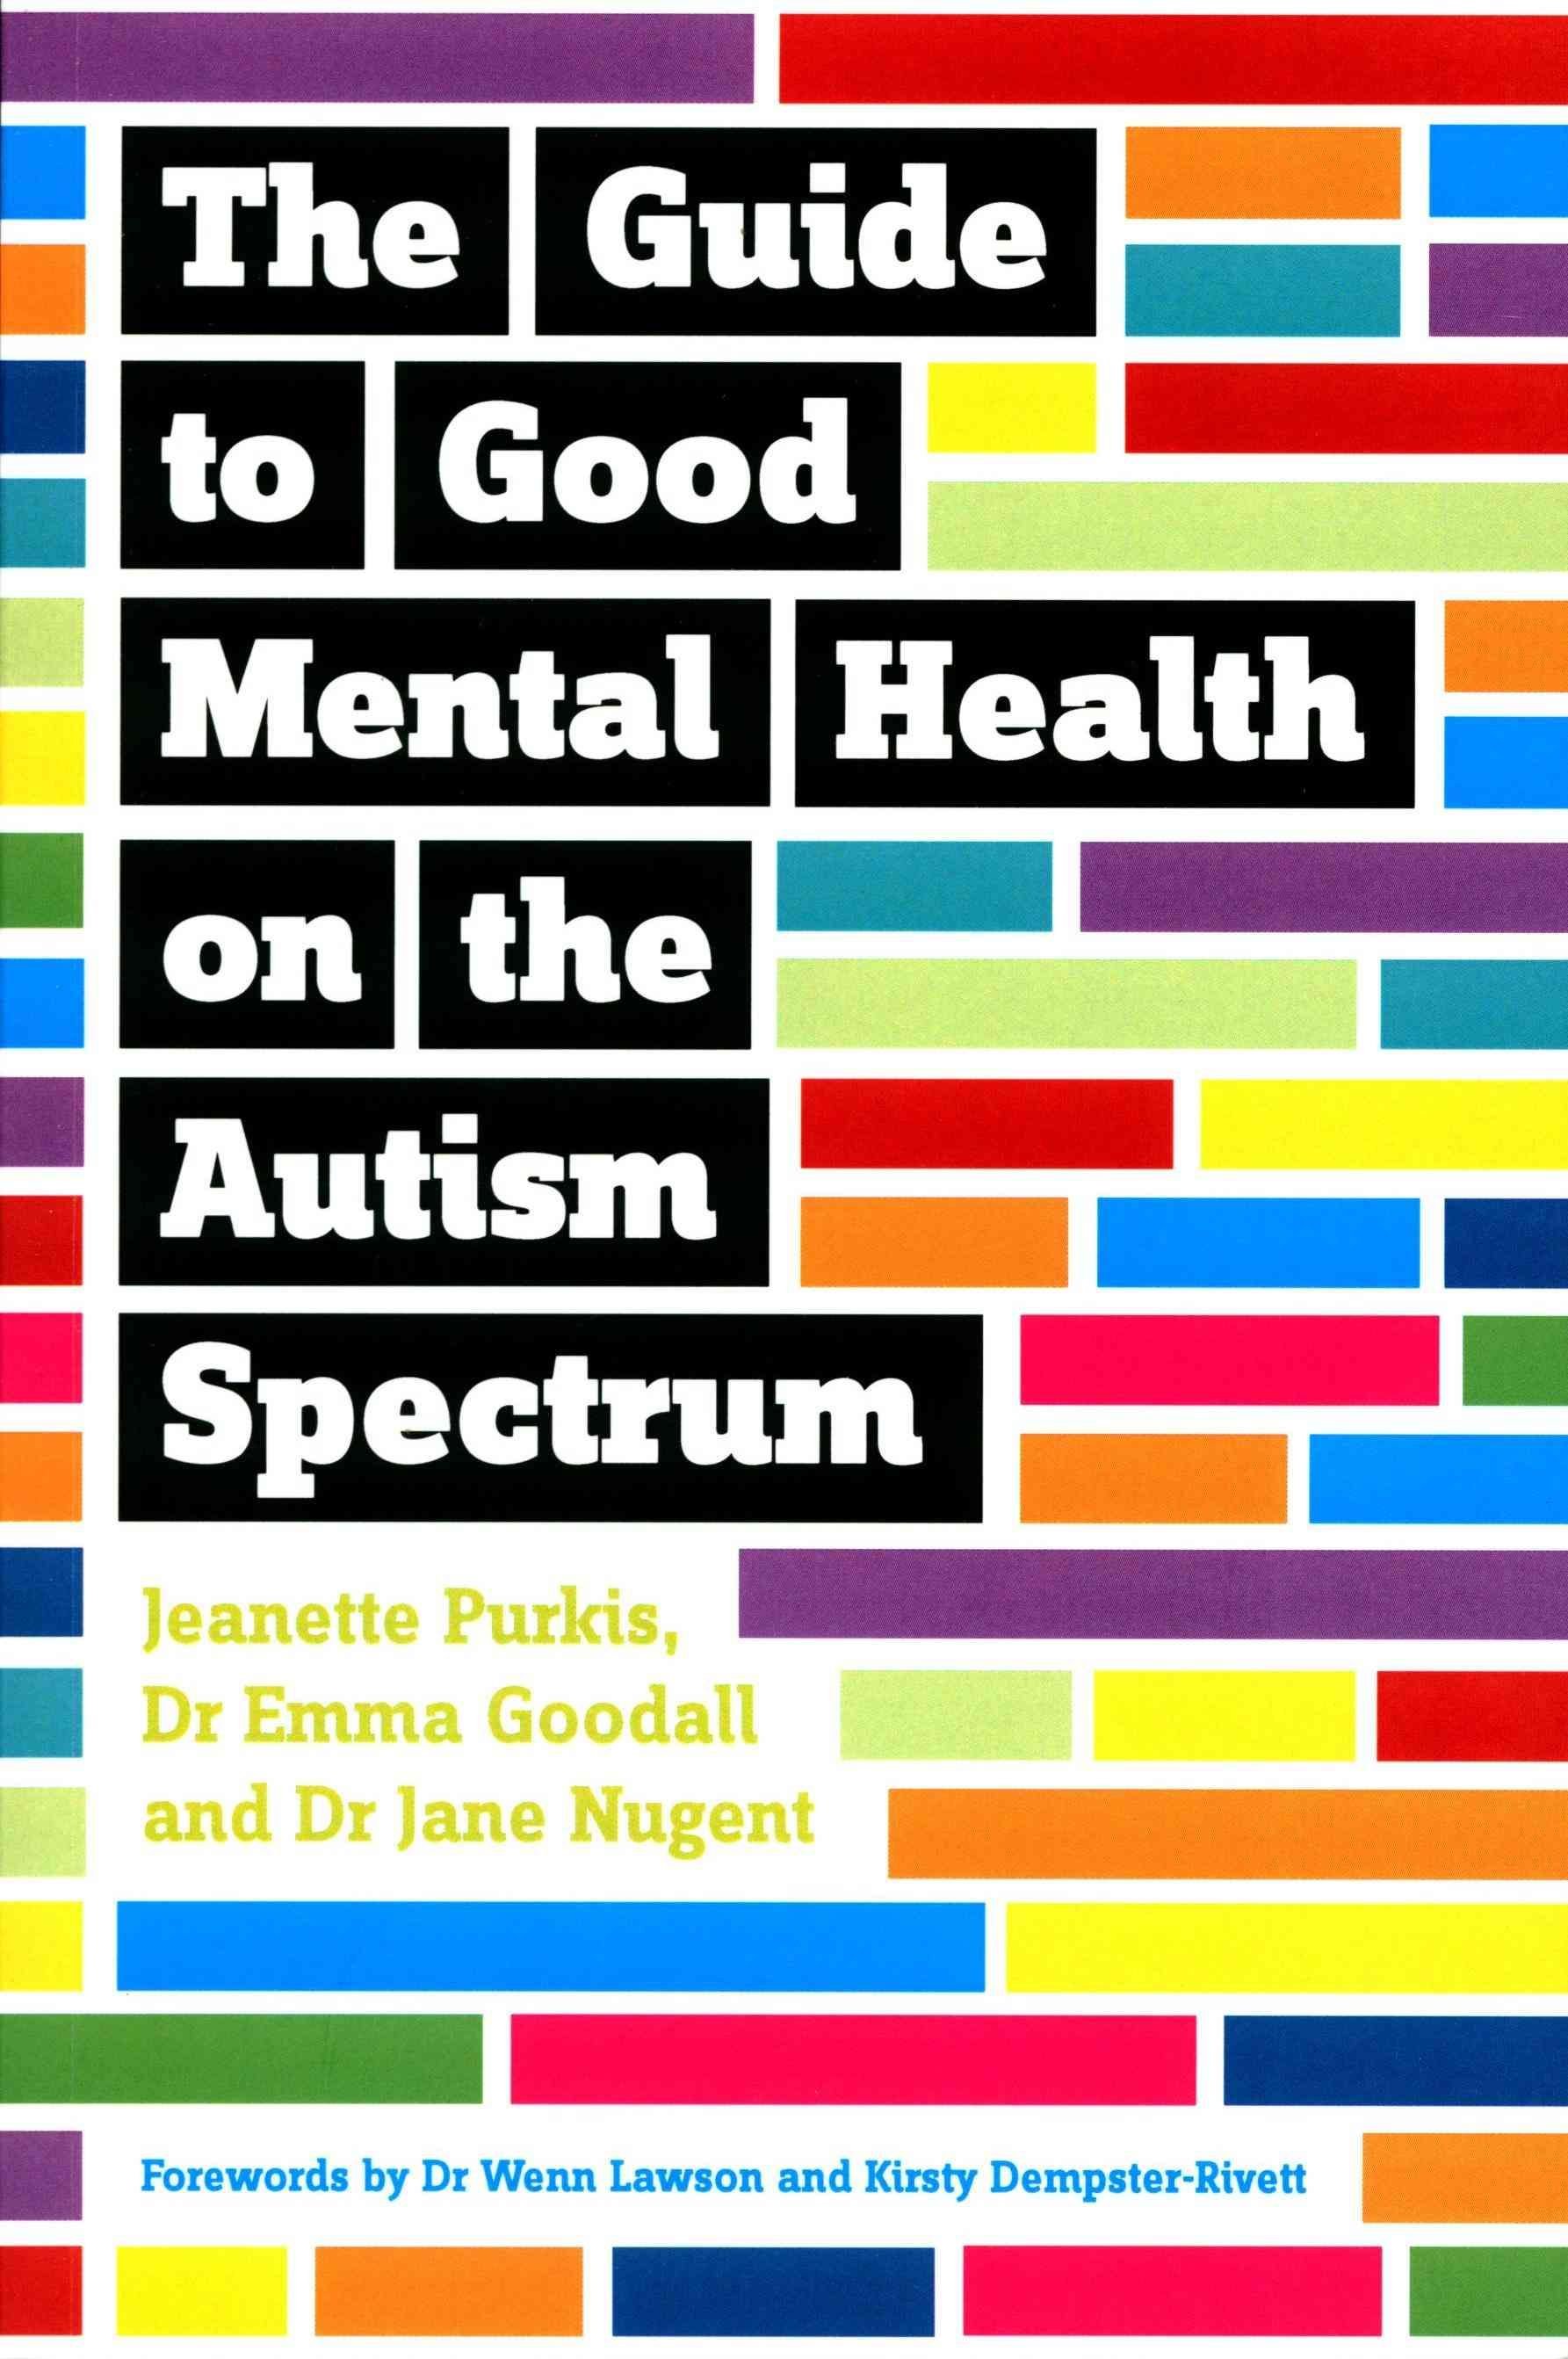 The Guide to Good Mental Health on the Autism Spectrum